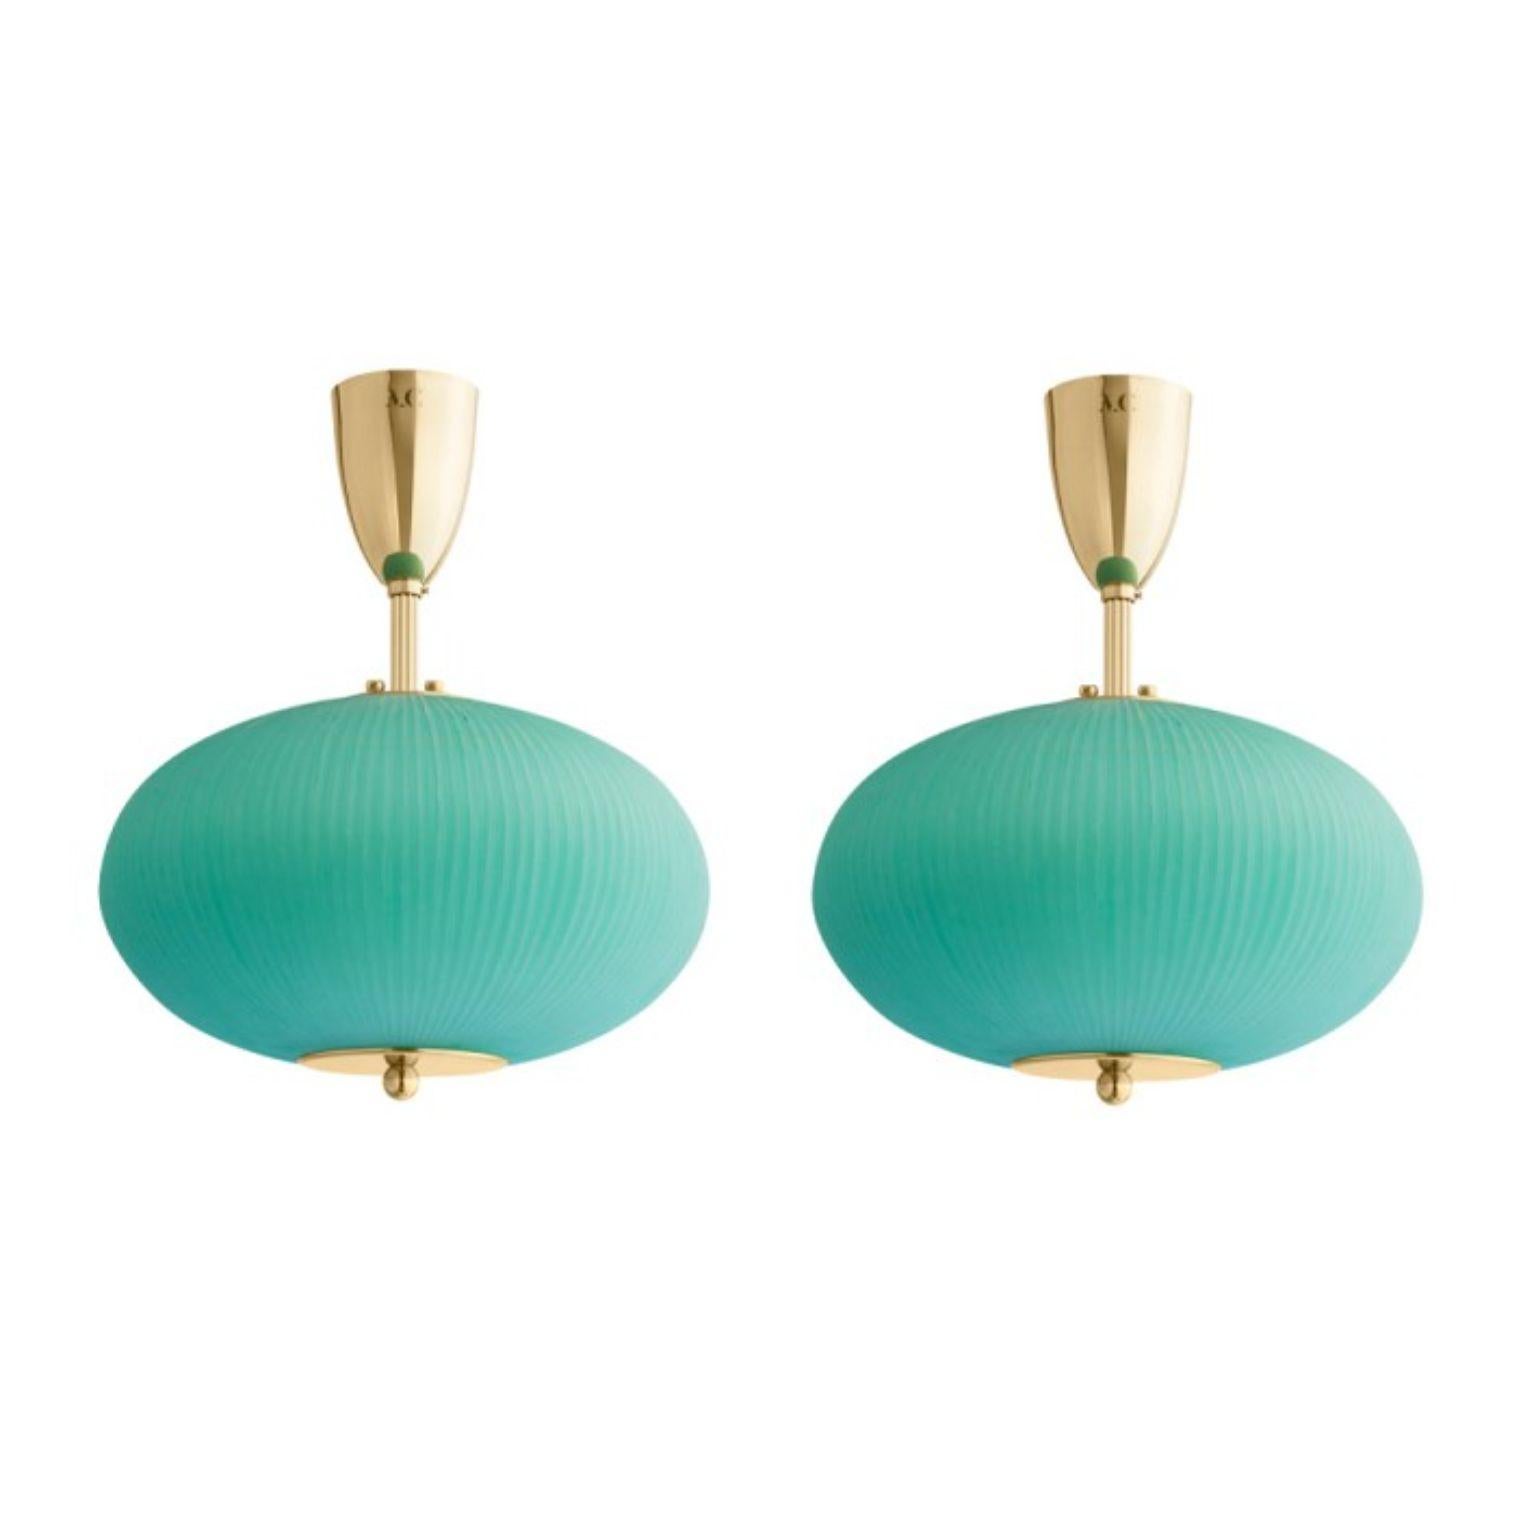 Ceiling lamp China 07 by Magic Circus Editions
Dimensions: H 40 x W 32 x D 32 cm
Materials: Brass, mouth blown glass sculpted with a diamond saw
Colour: jade green

Available finishes: Brass, nickel
Available colours: enamel soft white, soft